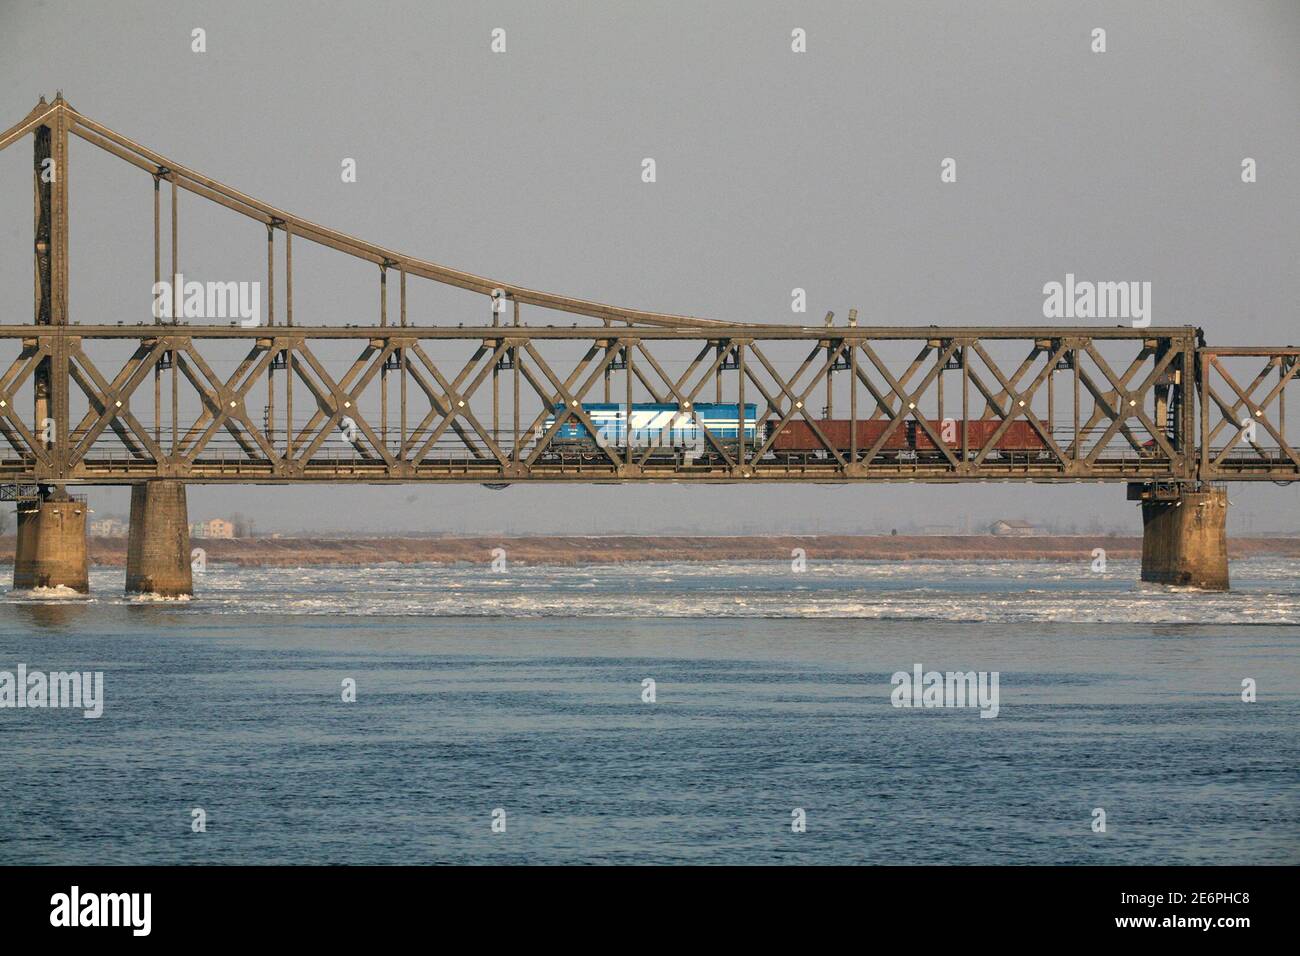 A freight train is seen on the Friendship Bridge over the Yalu River which connects the Chinese city of Dandong with Sinuiju in North Korea January 8, 2010. North Korea on Tuesday shut a customs house in the northwest part of the country near the Chinese border city of Dandong, closing the region, and sent police to reinforce the rail link, Japan's Nihon Keizai newspaper reported, indicating leader Kim Jong-il may be about to visit his neighbour and biggest benefactor, a report said on Wednesday.    REUTERS/Jacky Chen (NORTH KOREA - Tags: POLITICS MILITARY) Stock Photo